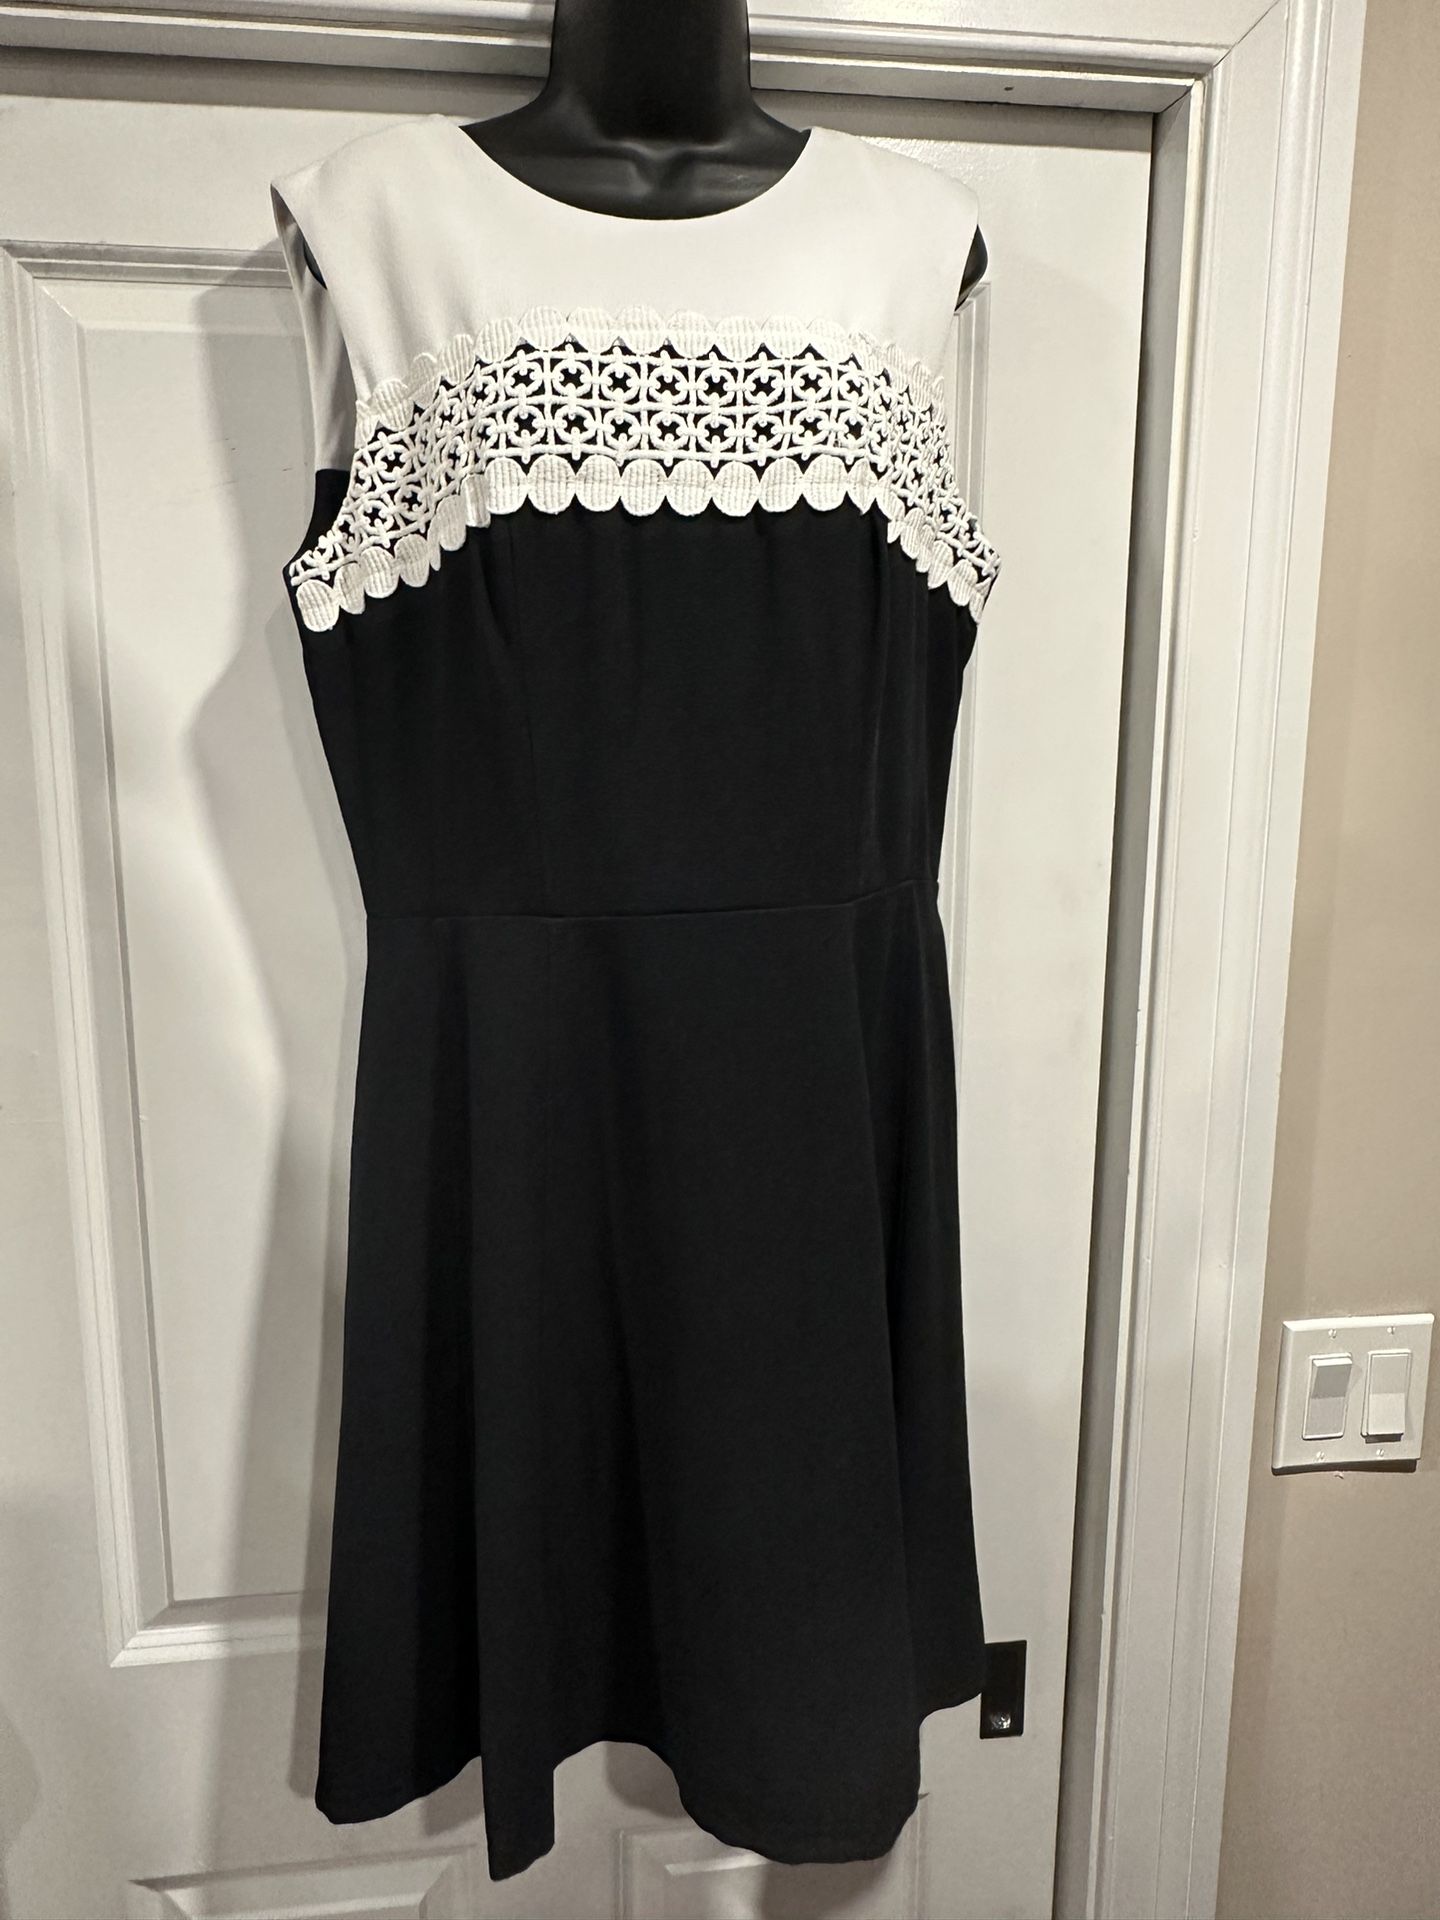 Chic Black & White Dress with Lace Detail